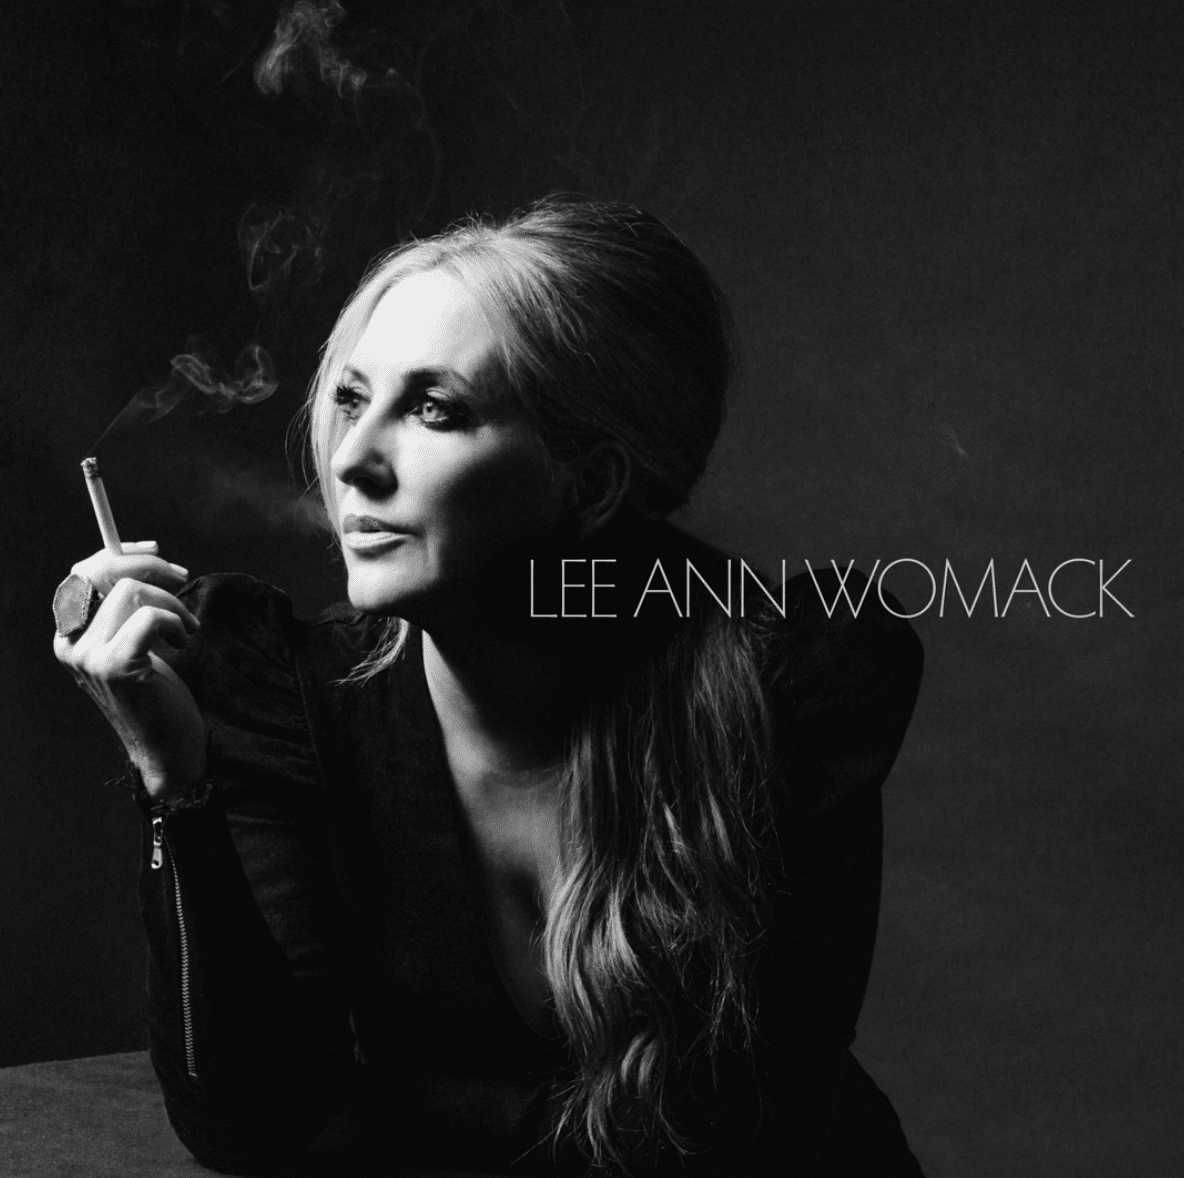 Lee Ann Womack's latest album: "The Lonely, The Lonesome & The Gone."